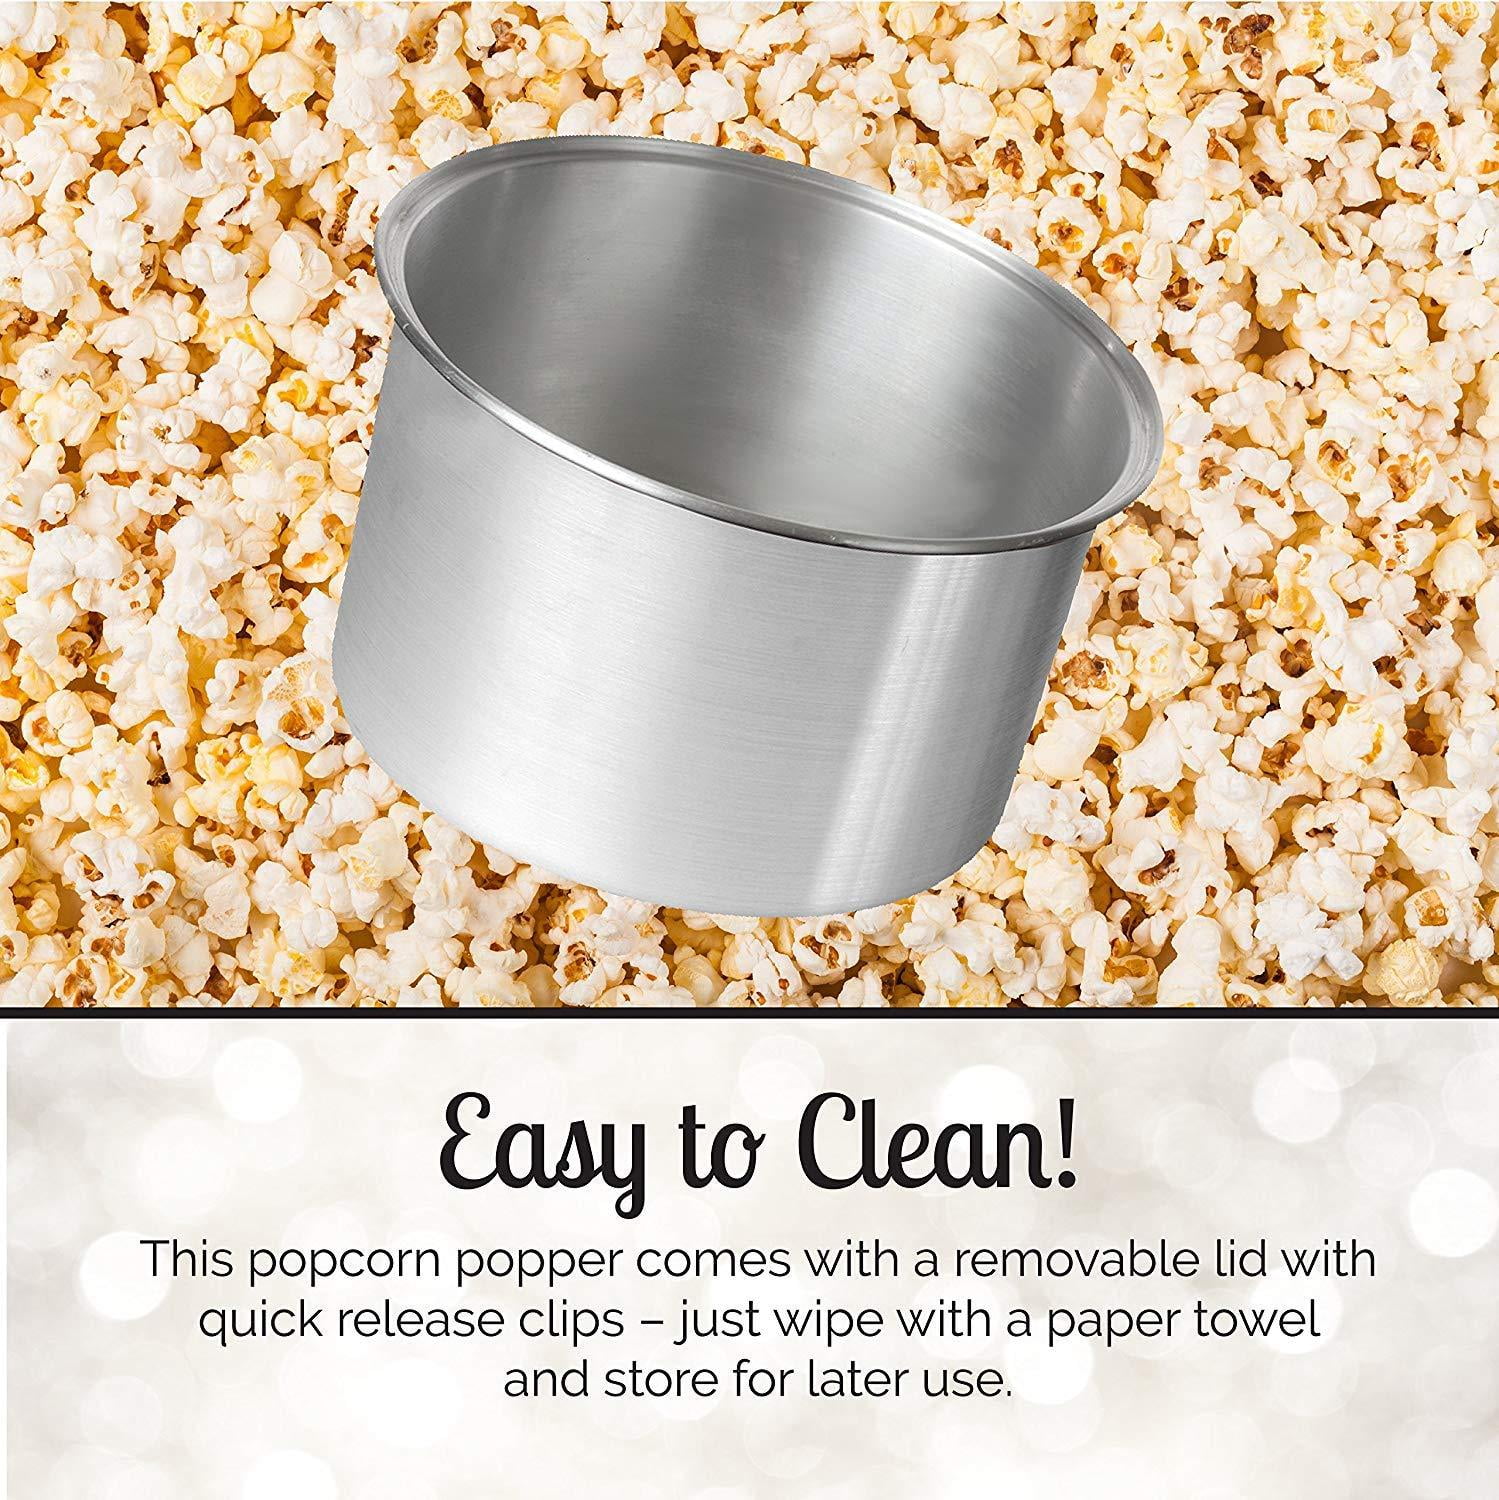 Whirley Pop Stovetop Popcorn Popper Wabash Valley Farms Color: Silver